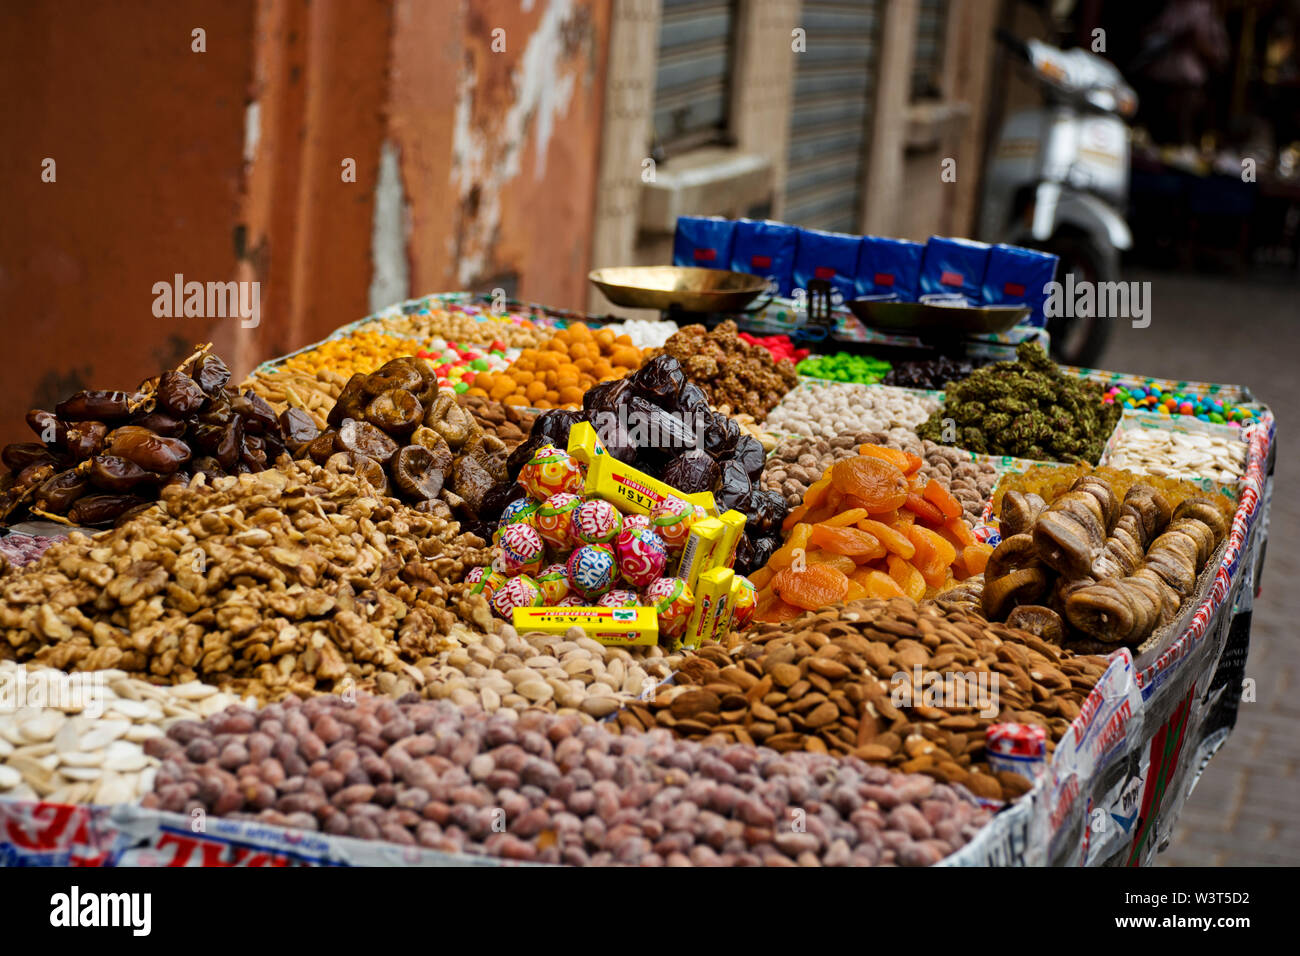 Local Moroccan stalls selling nuts, sweet goods in the streets, alleyways of Marrakech going about daily arabic life in the cultural Medina Stock Photo